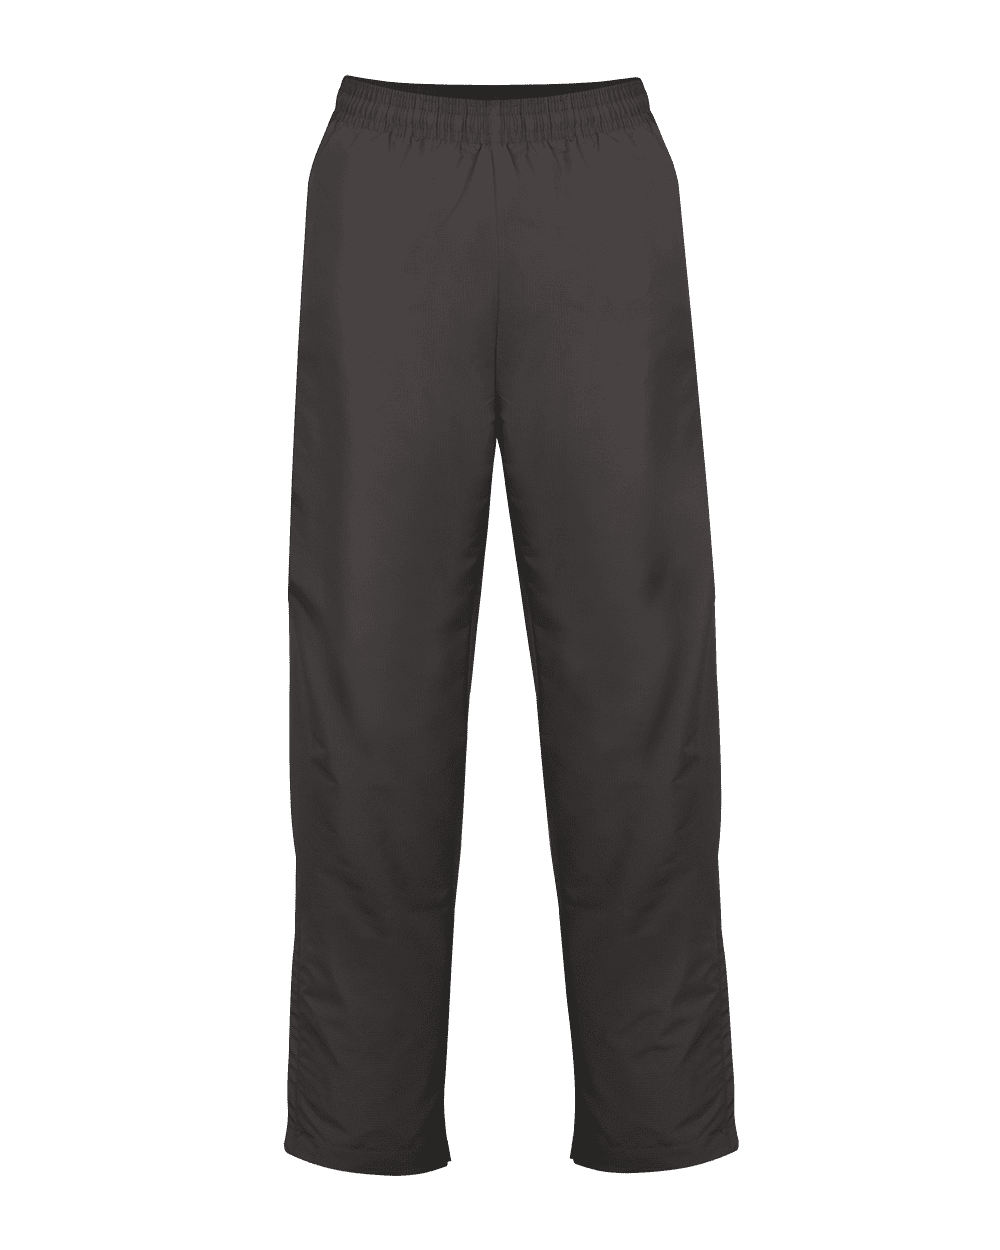 ATACS FG Browning Hell's Canyon Speed Phase Base Layer Pants 2X 